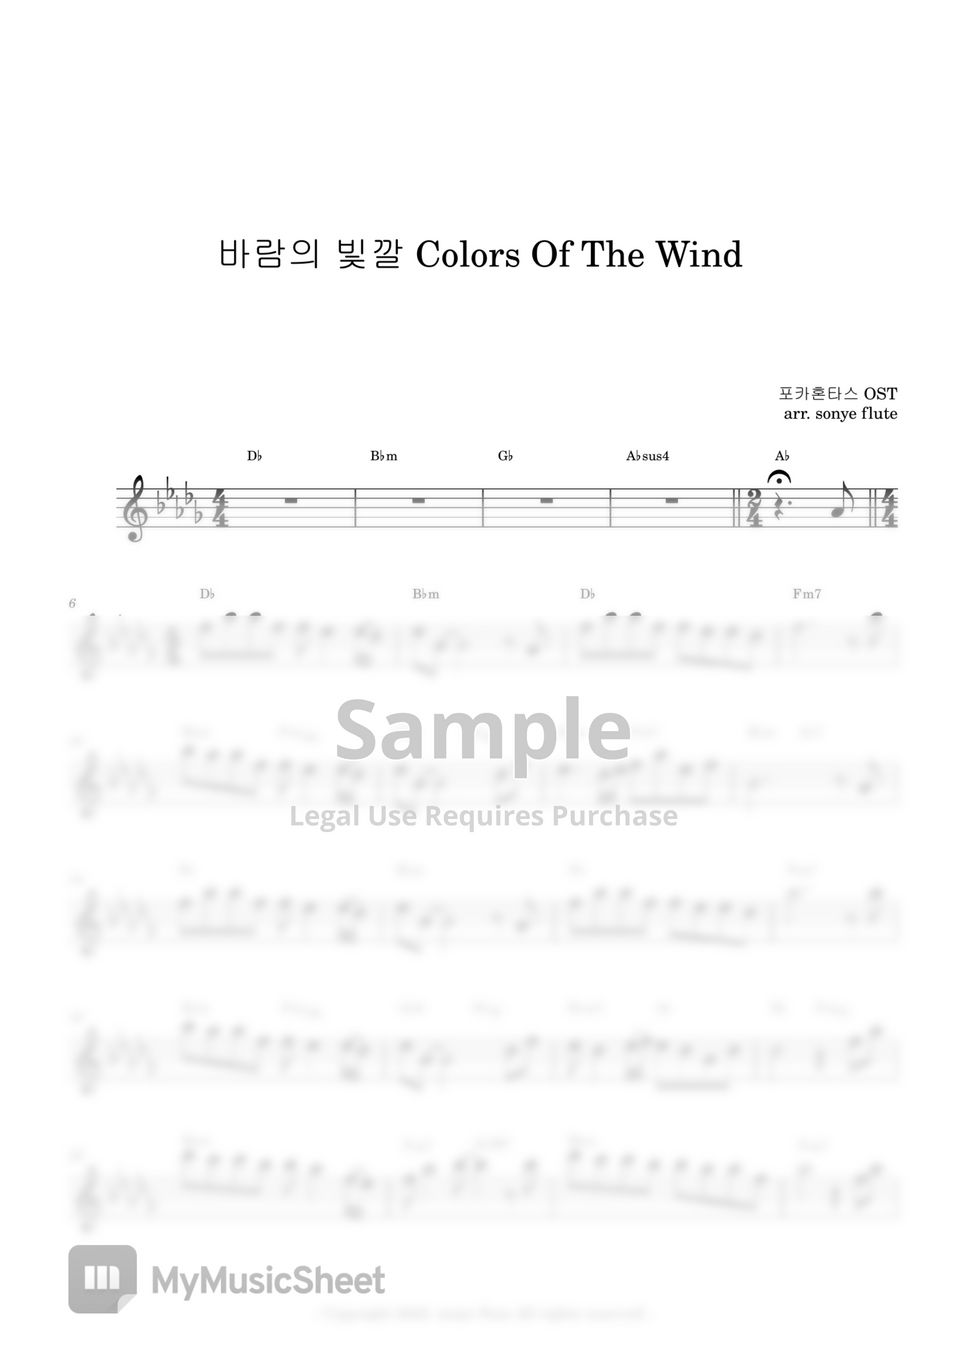 Disney Pocahontas OST - Color Of The Wind (Flute Sheet Music) by sonye flute